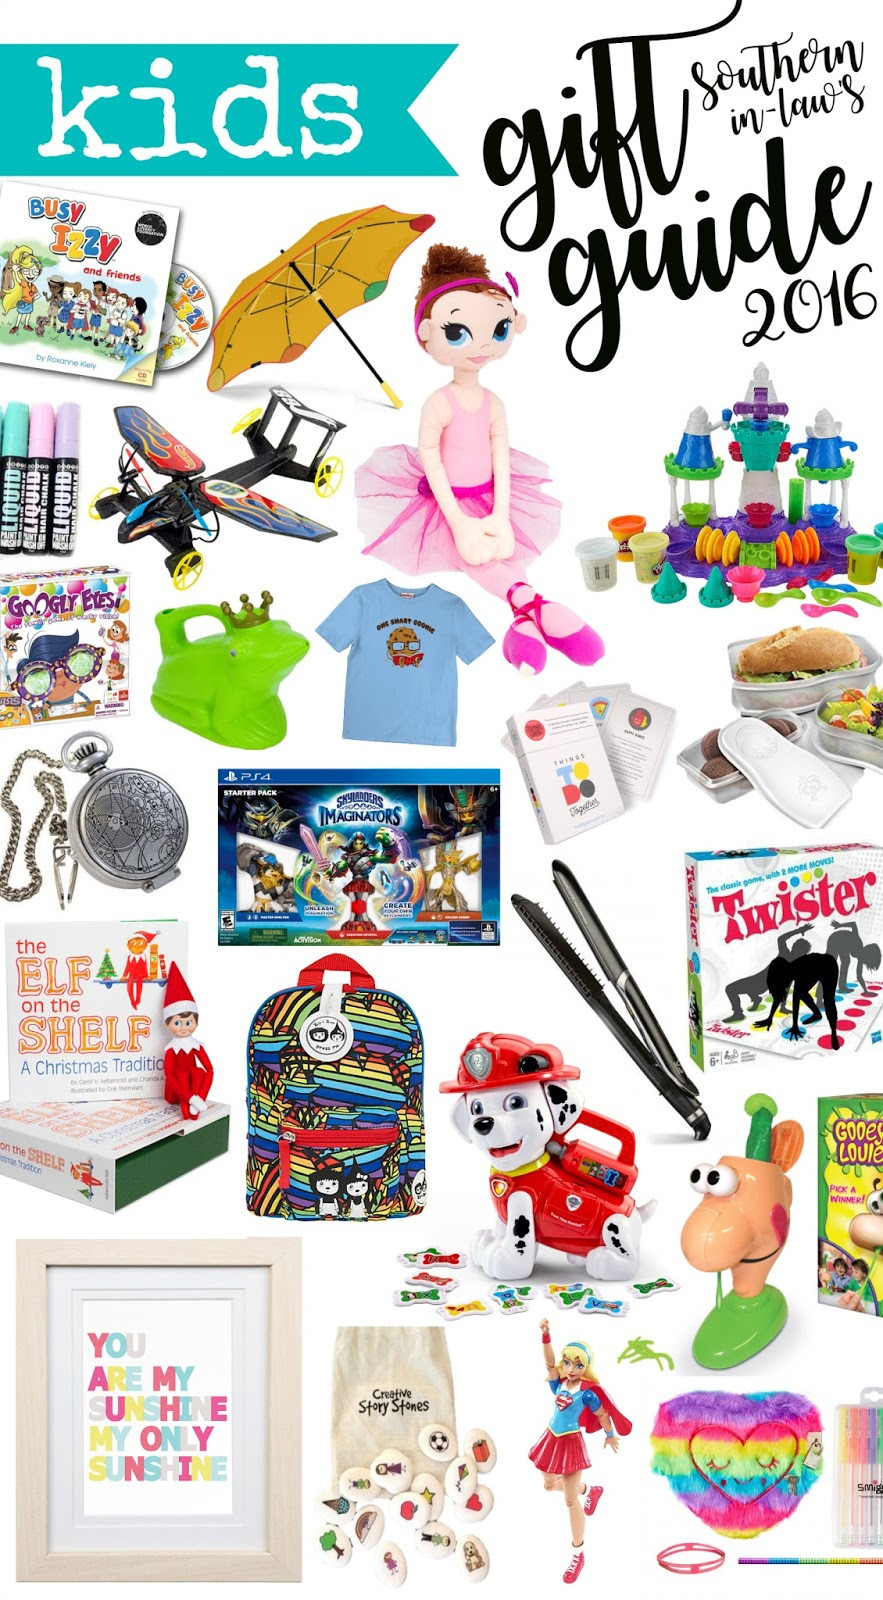 Christmas Gift Ideas From Kids
 Southern In Law 2016 Kids Christmas Gift Guide